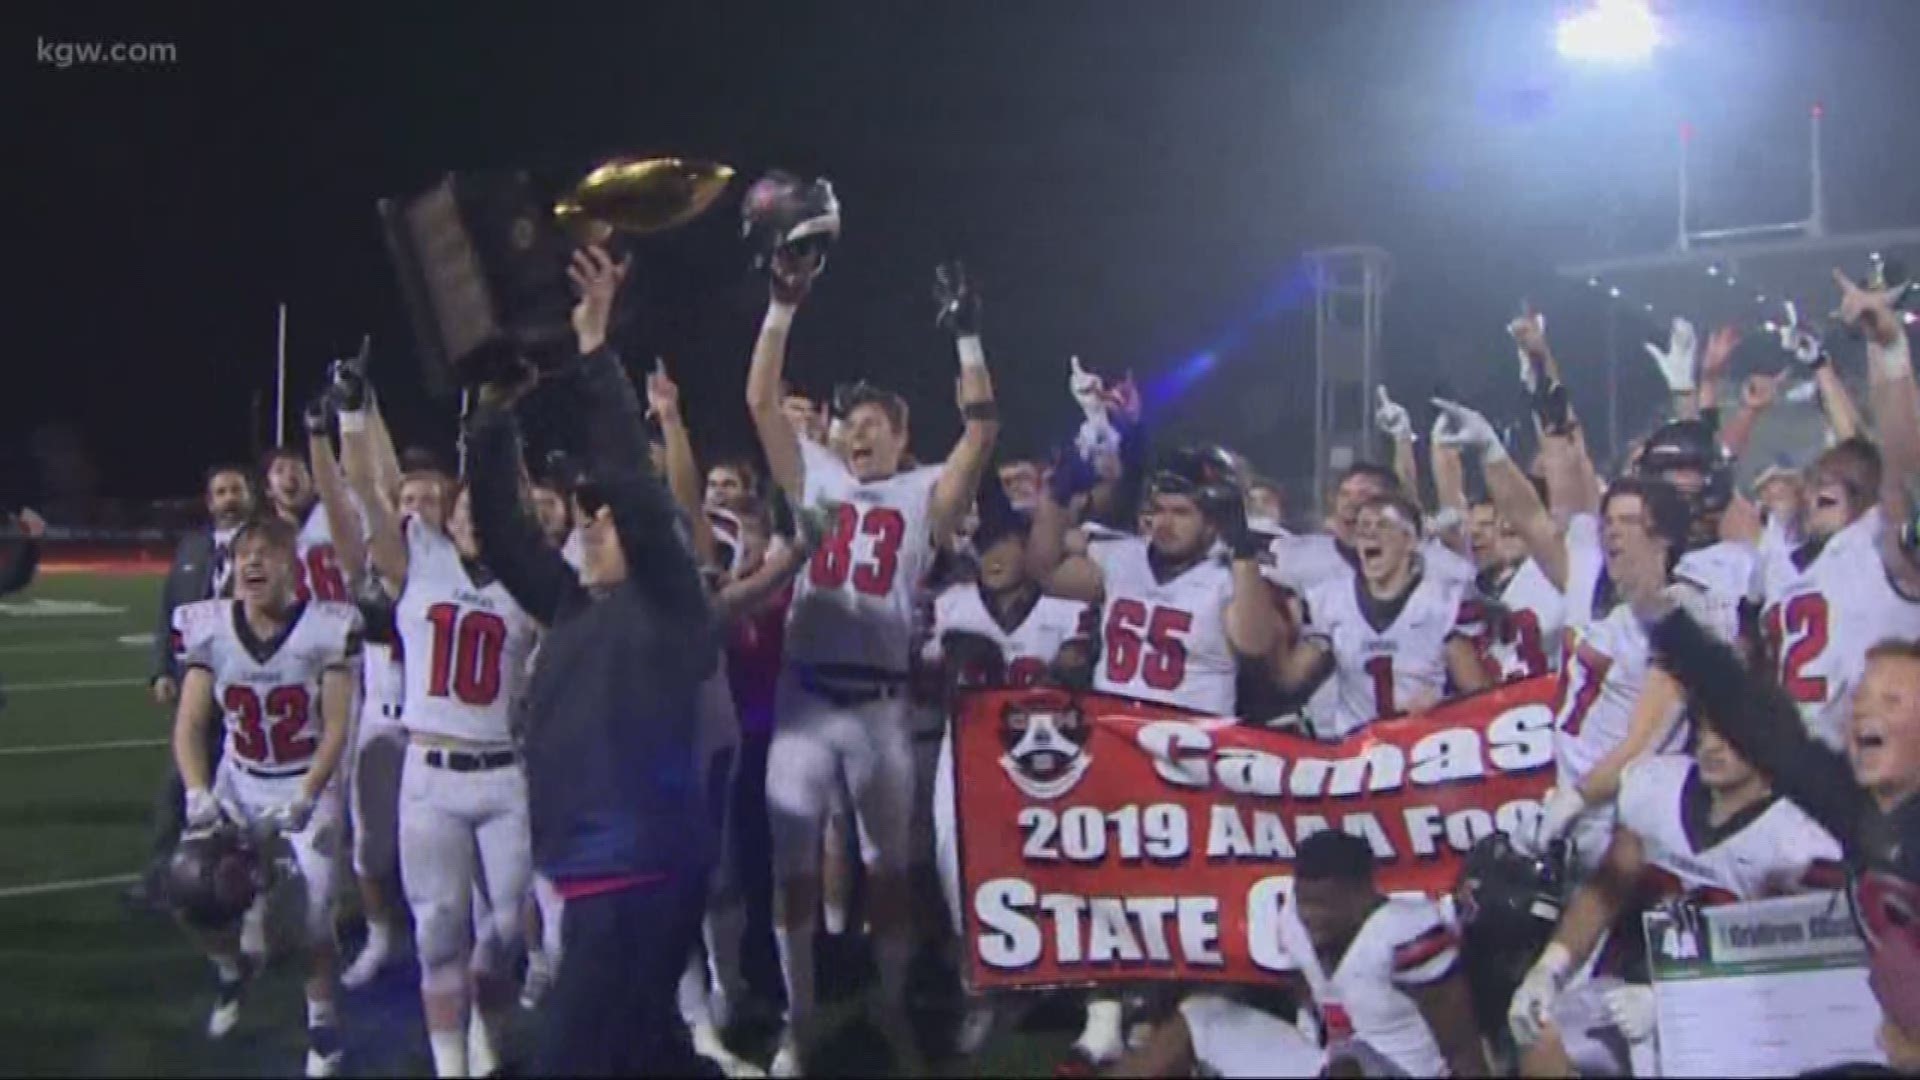 The Papermakers completed a perfect 14-0 season on Saturday, beating Bothell to win the 4A state title in Washington.